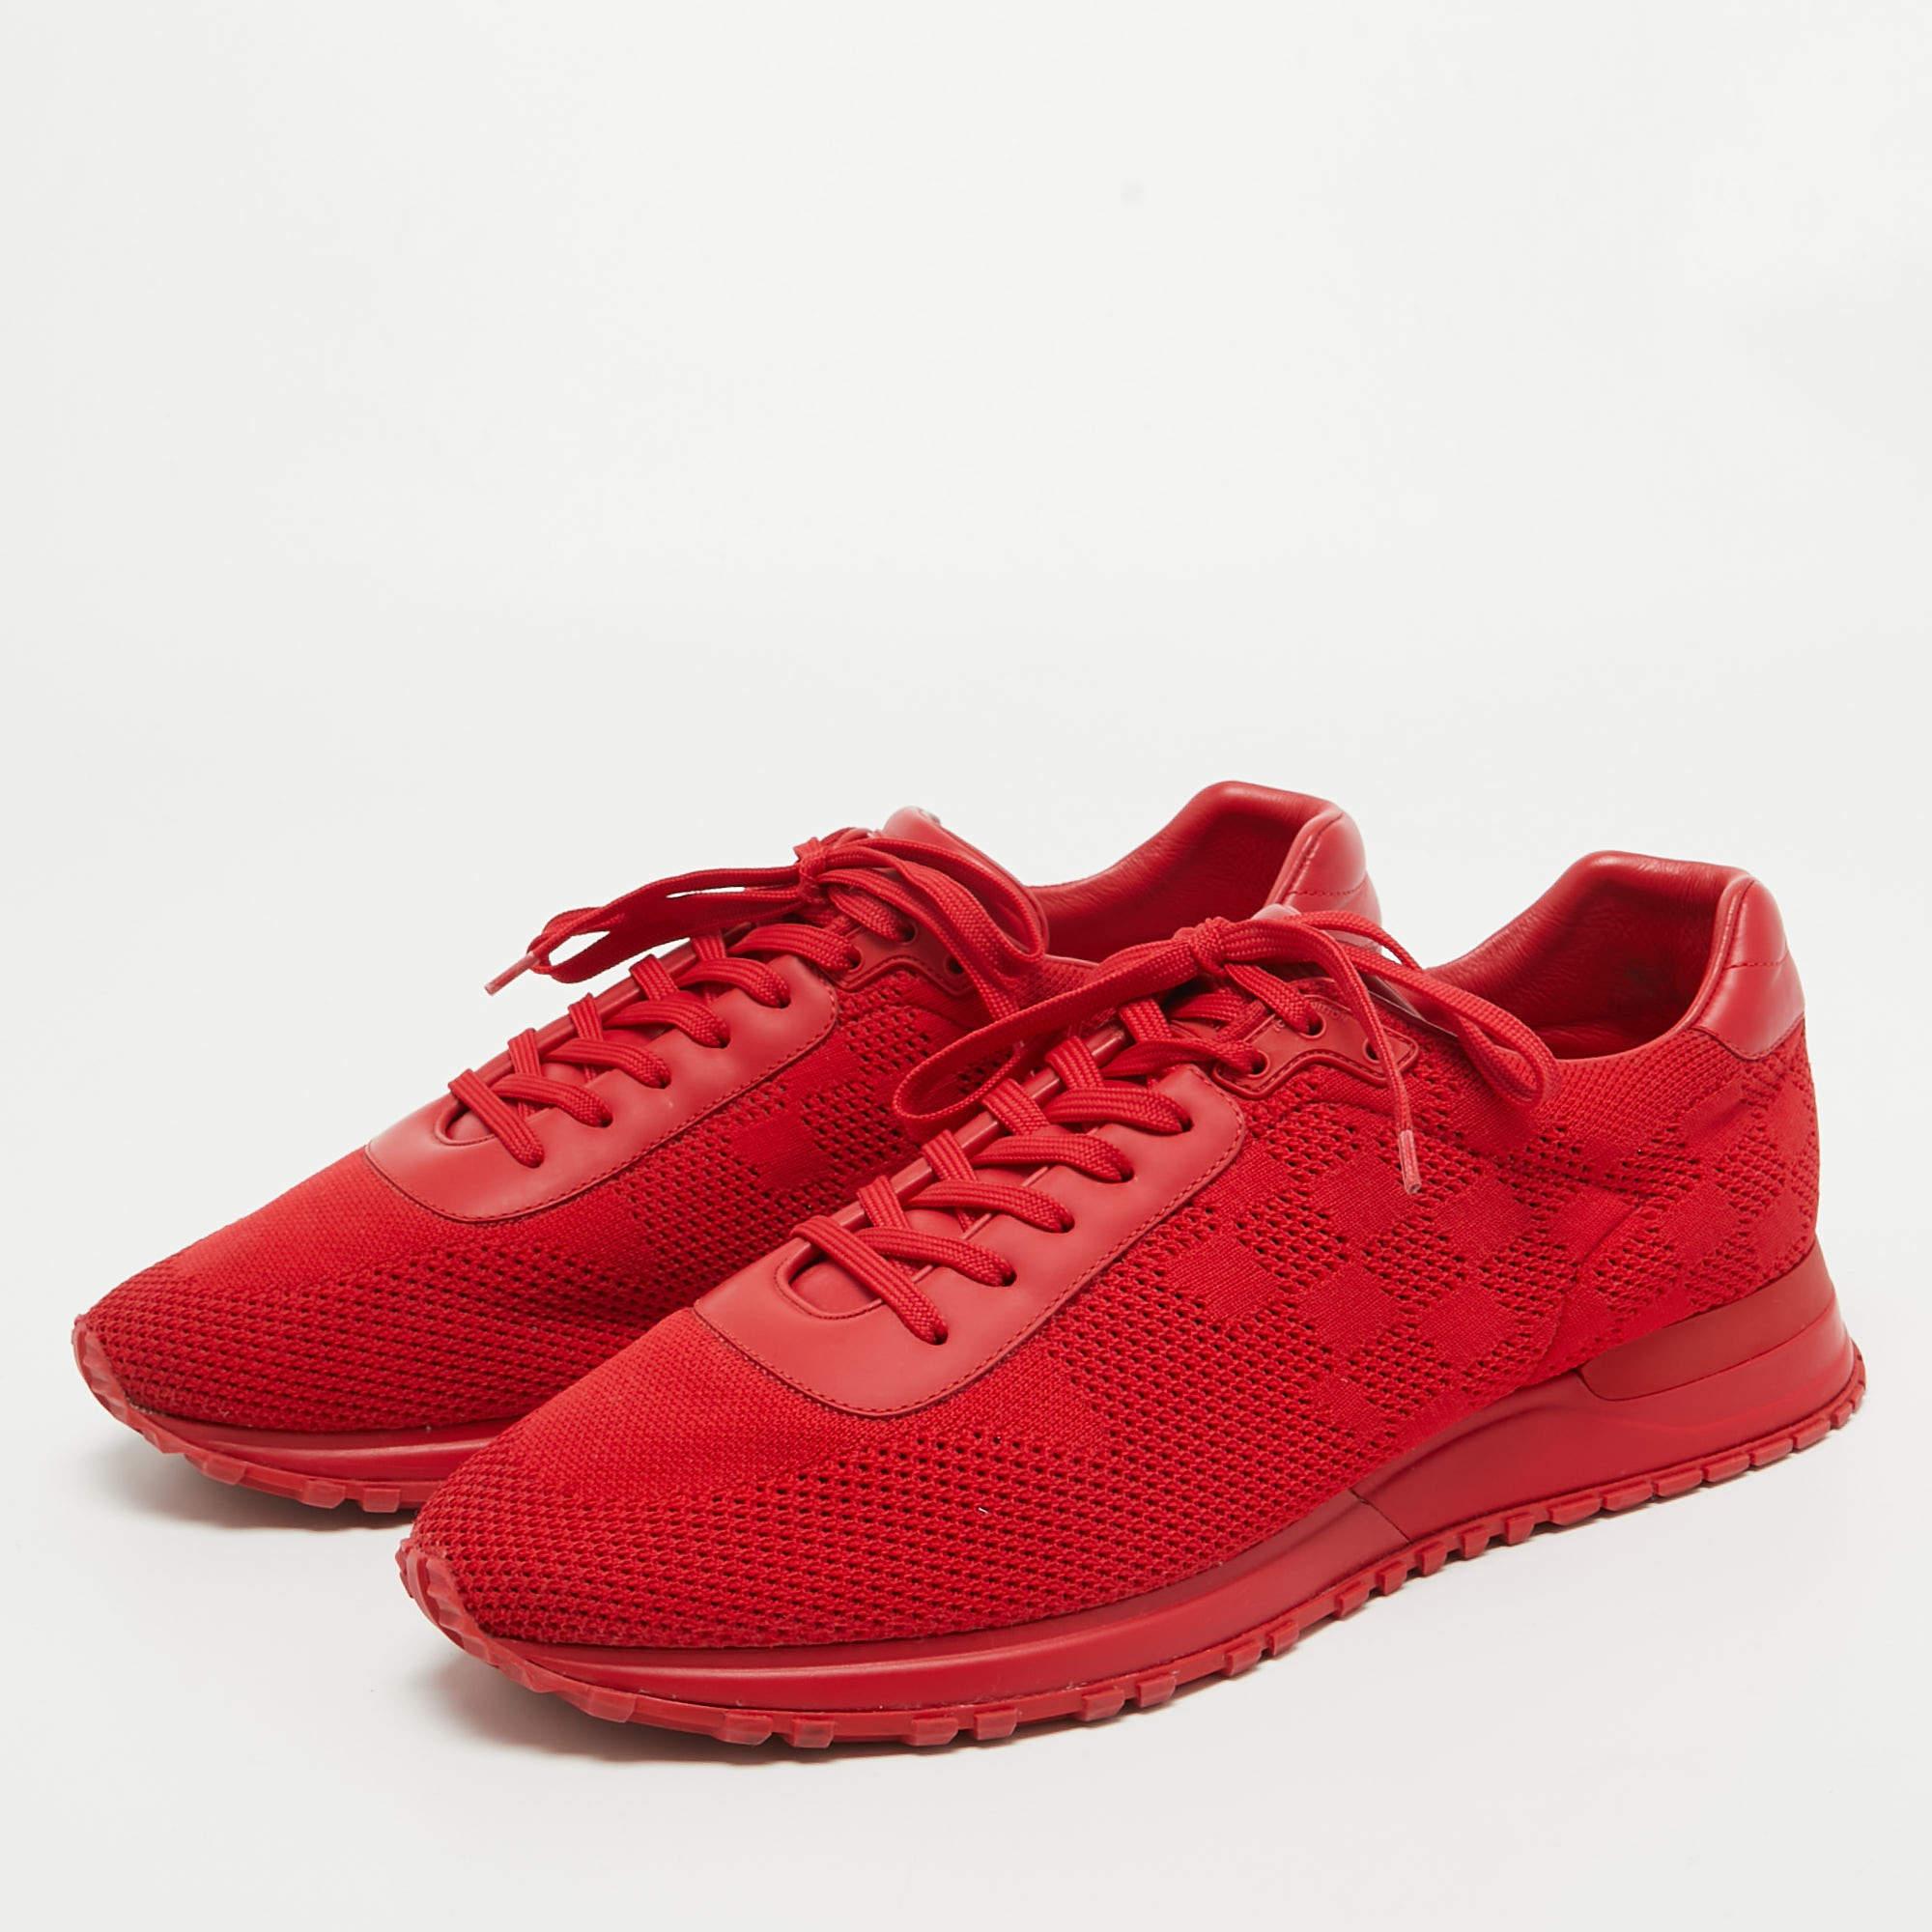 Louis Vuitton Red Leather and Mesh Runaway Damier Sneakers Size 43 For Sale 3